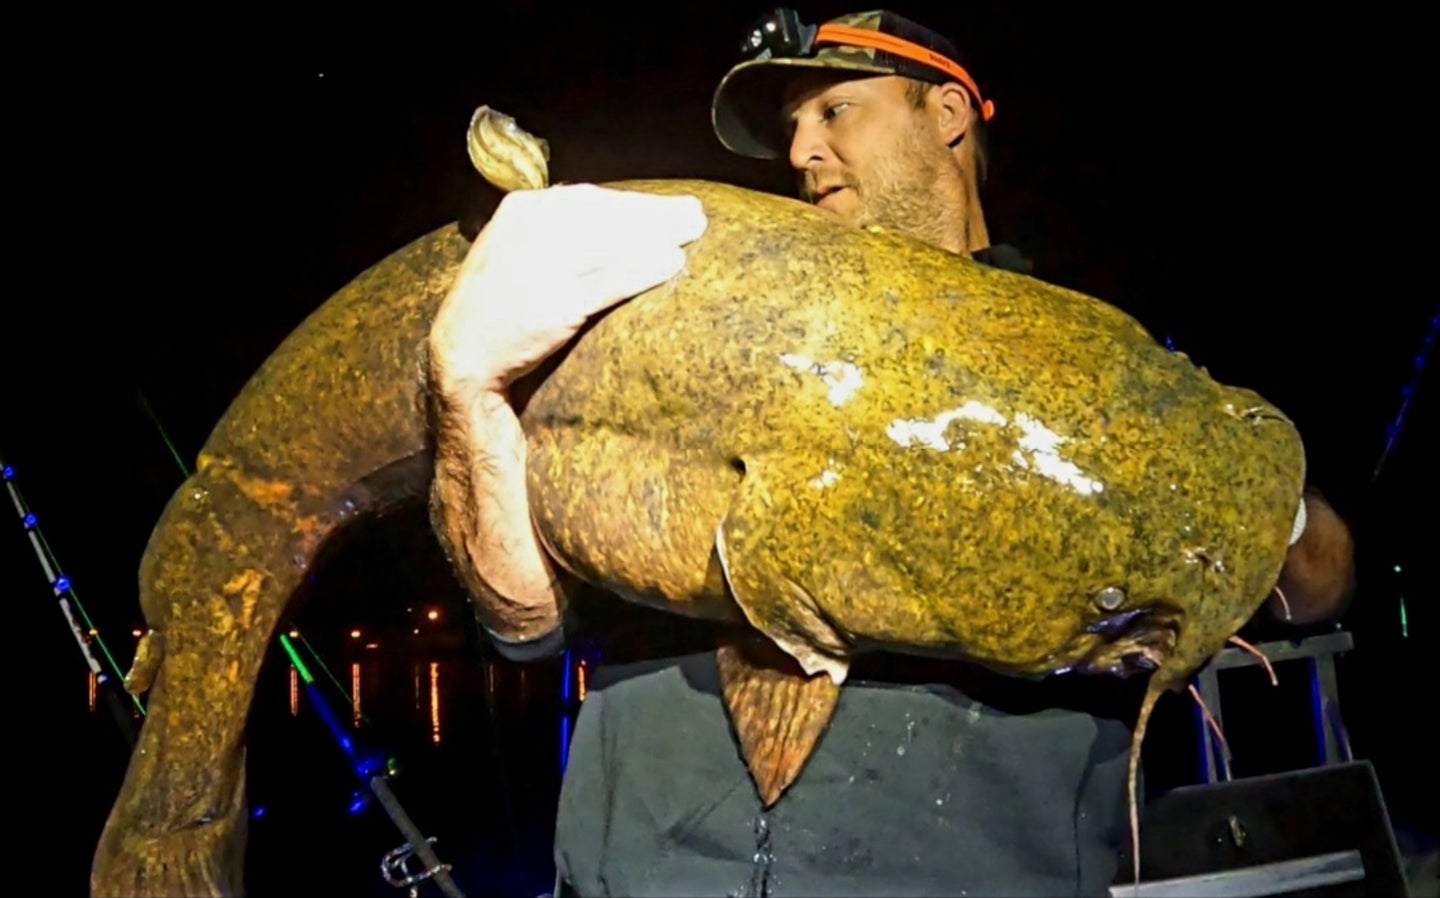 Catching a Strange River Monster While Chasing After Big Fish 